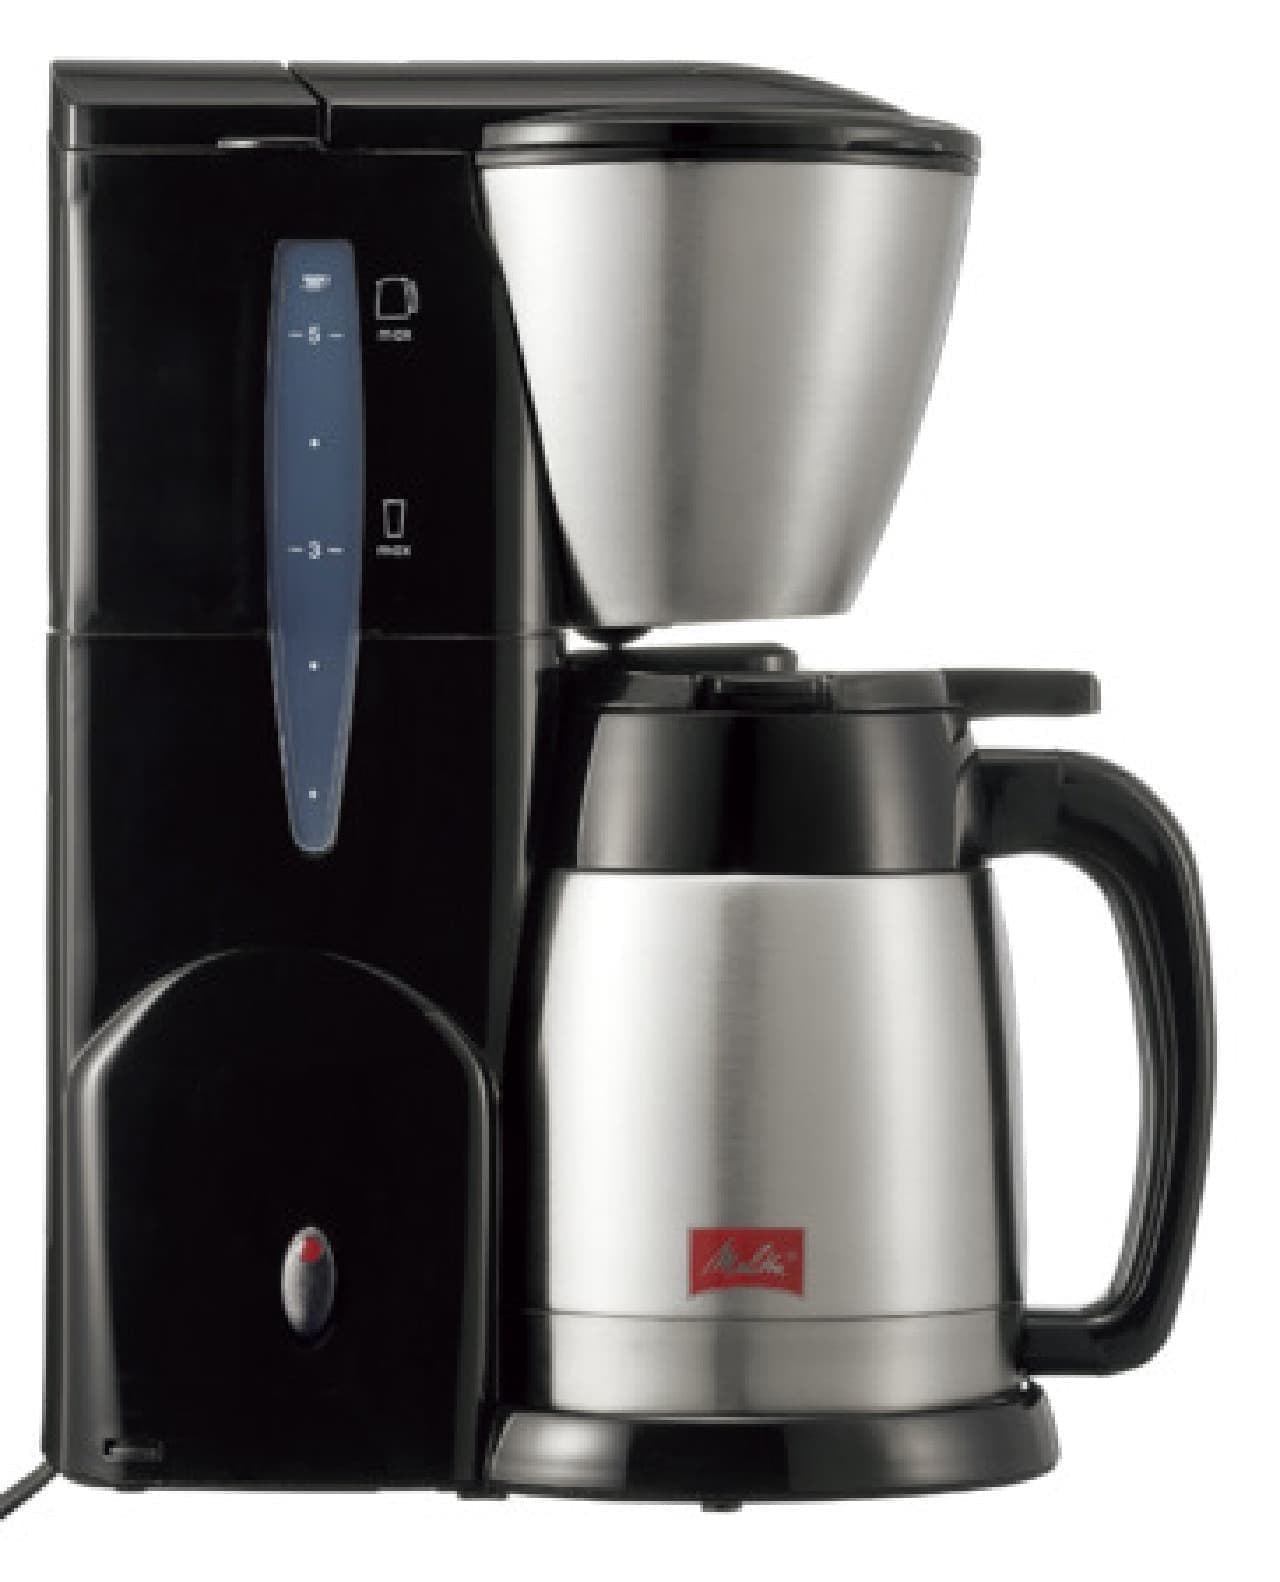 Melitta's latest coffee maker "Melita Orfi Plus" Delicious and easy-to-use functions